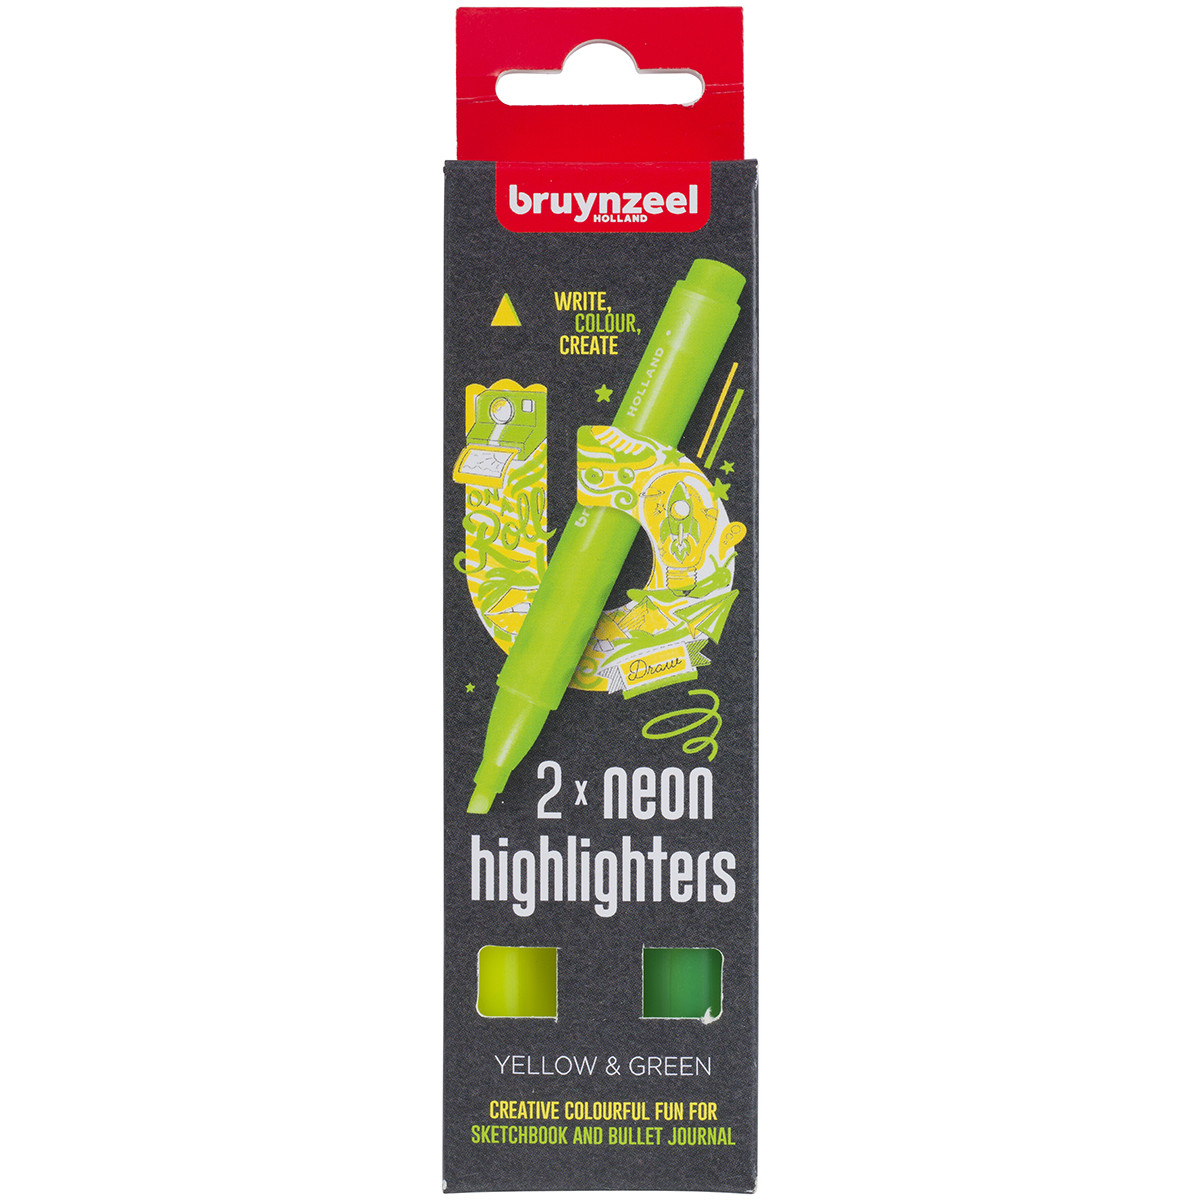 Bruynzeel Highlighters - Yellow & Green (Pack of 2)